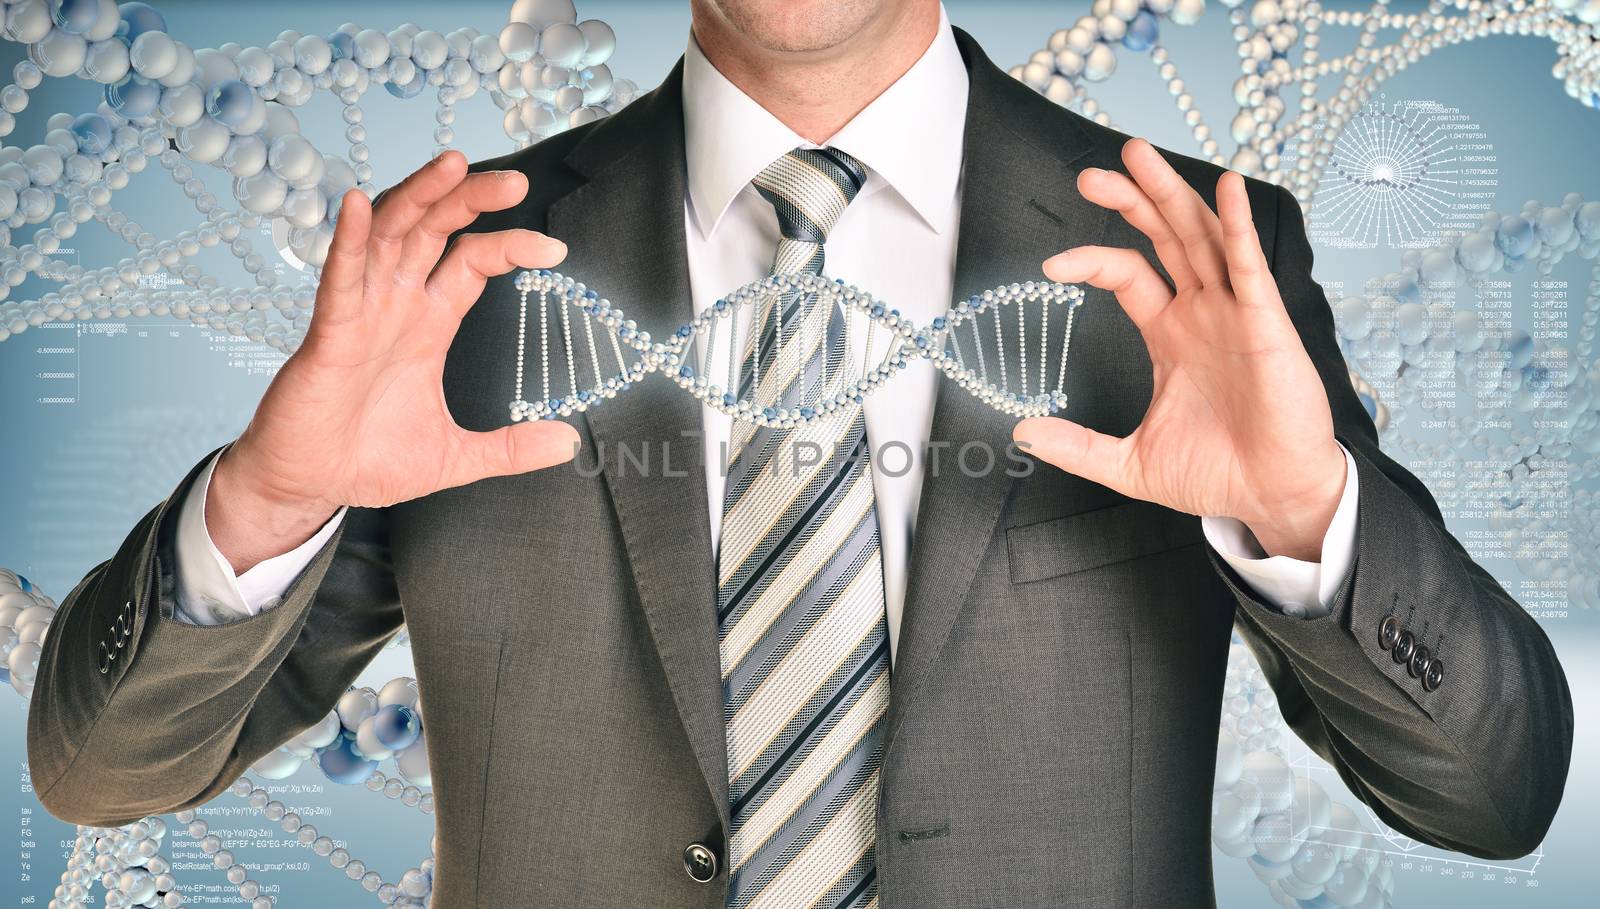 Businessman holding dna spiral in hands by cherezoff